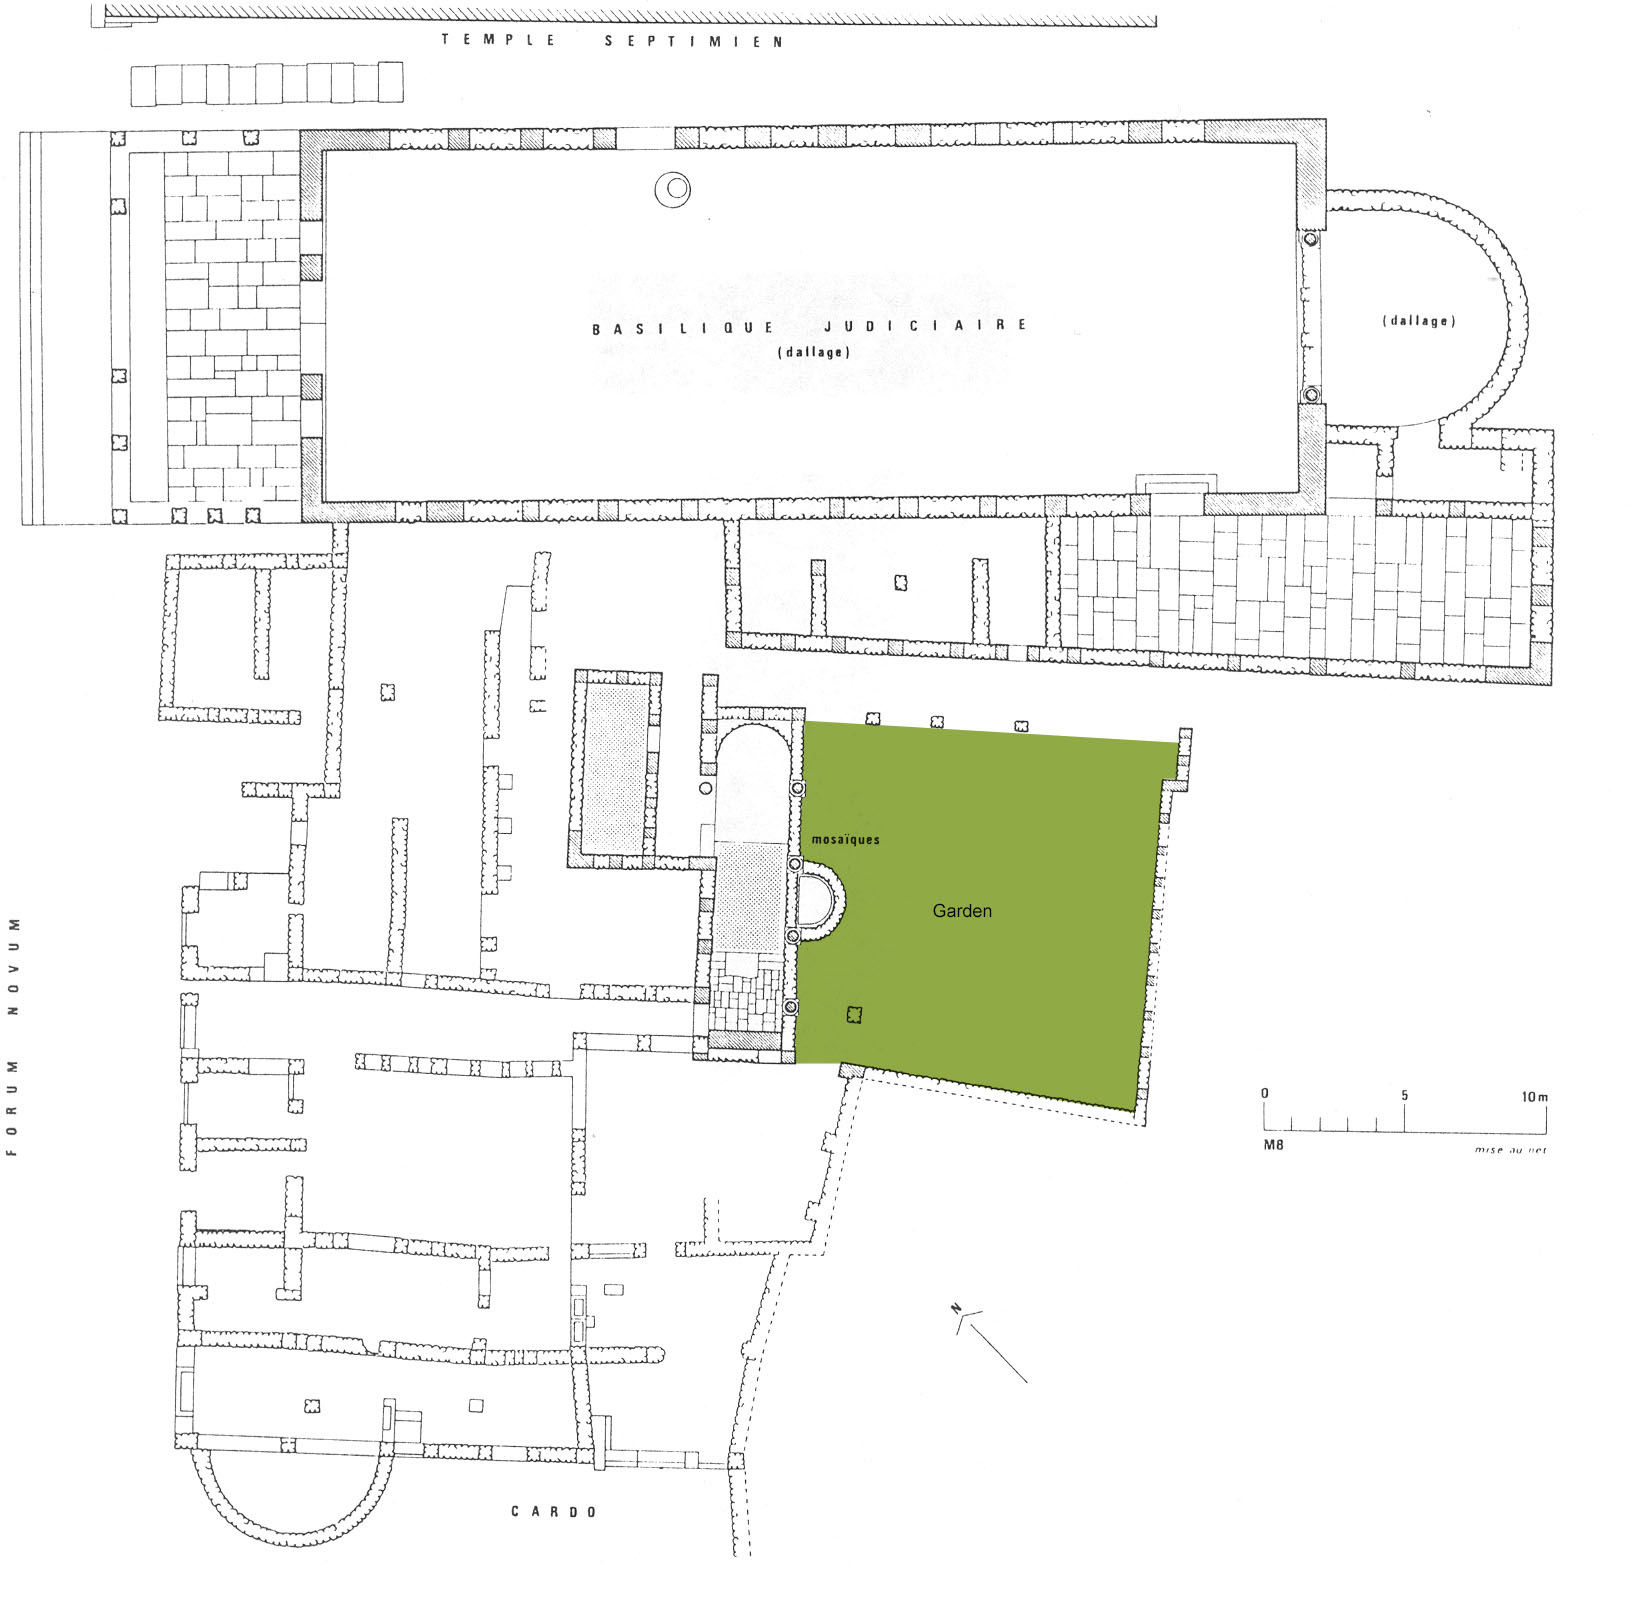 Plan of the House of Hylas. More details are included in the garden description section above.